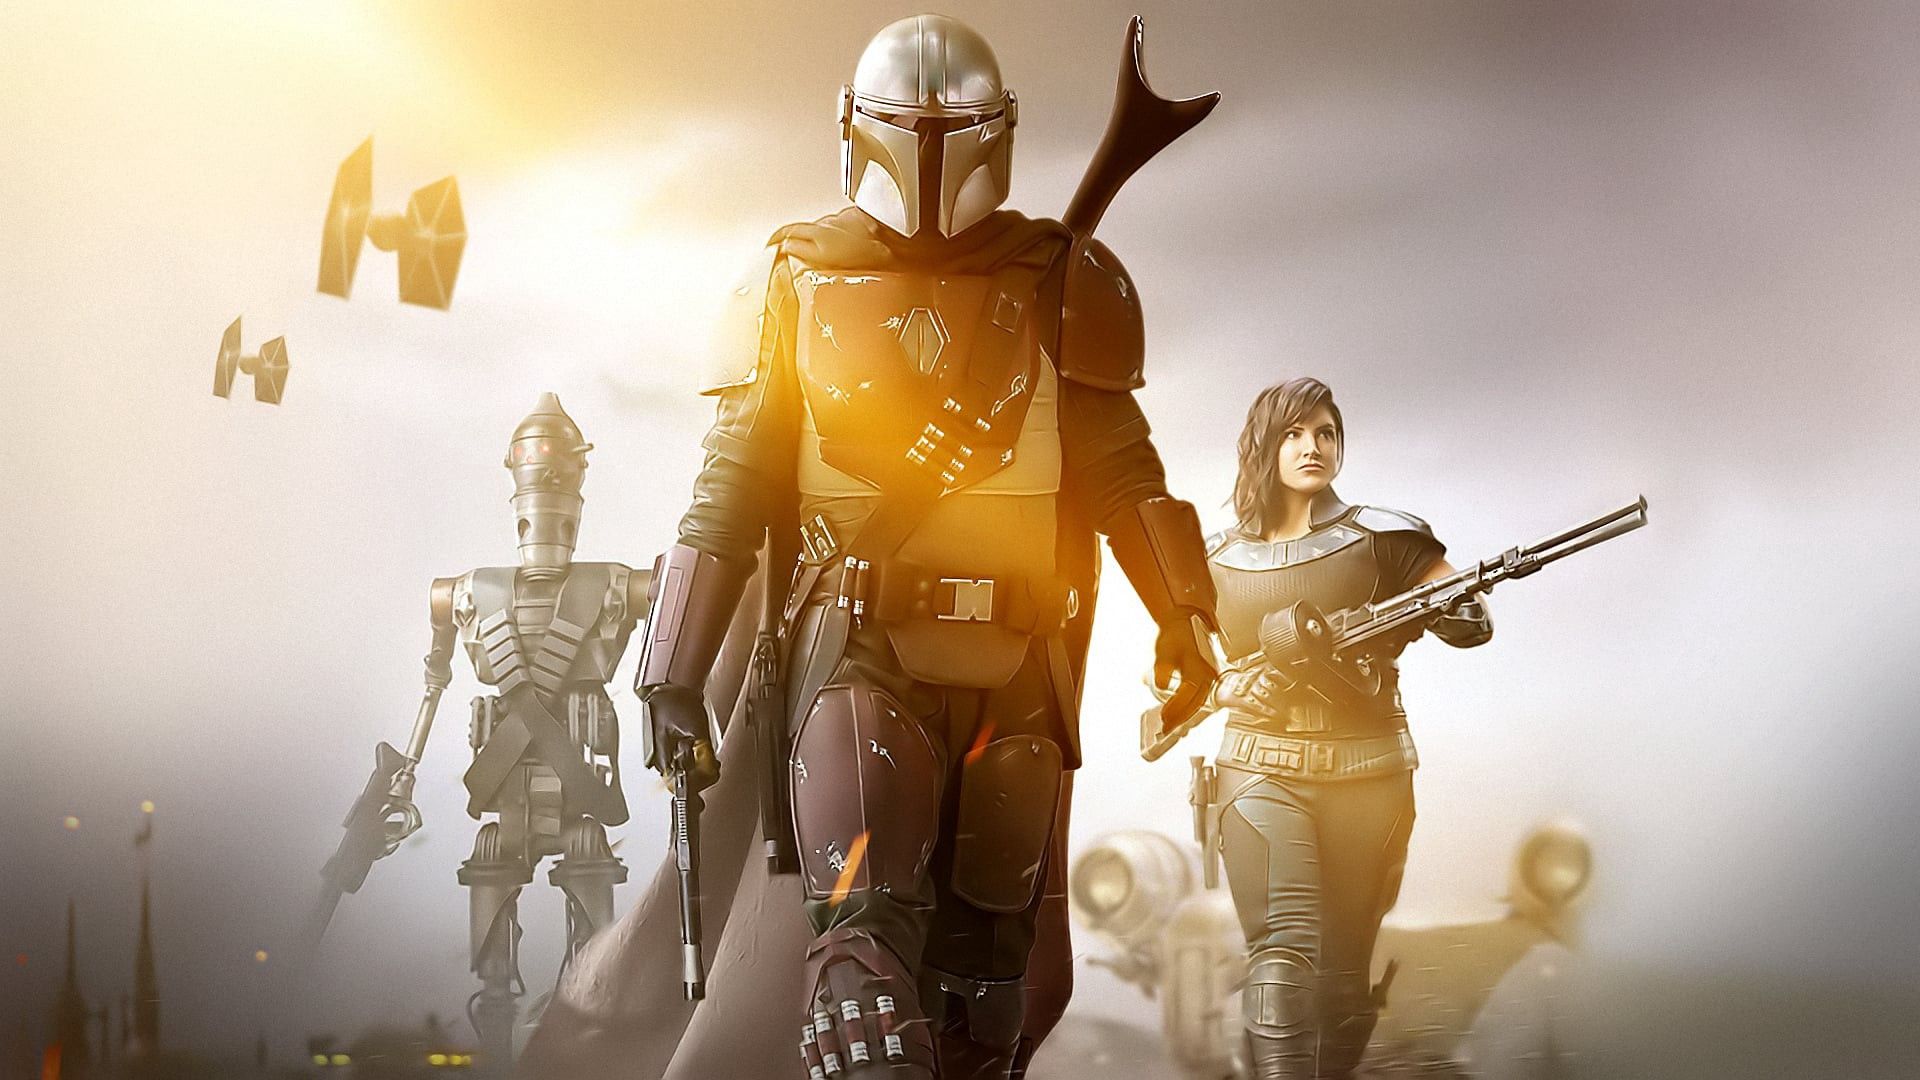 The Mandalorian Season 2: Release Date, Story, Cast and Other Details for the Disney Plus Show